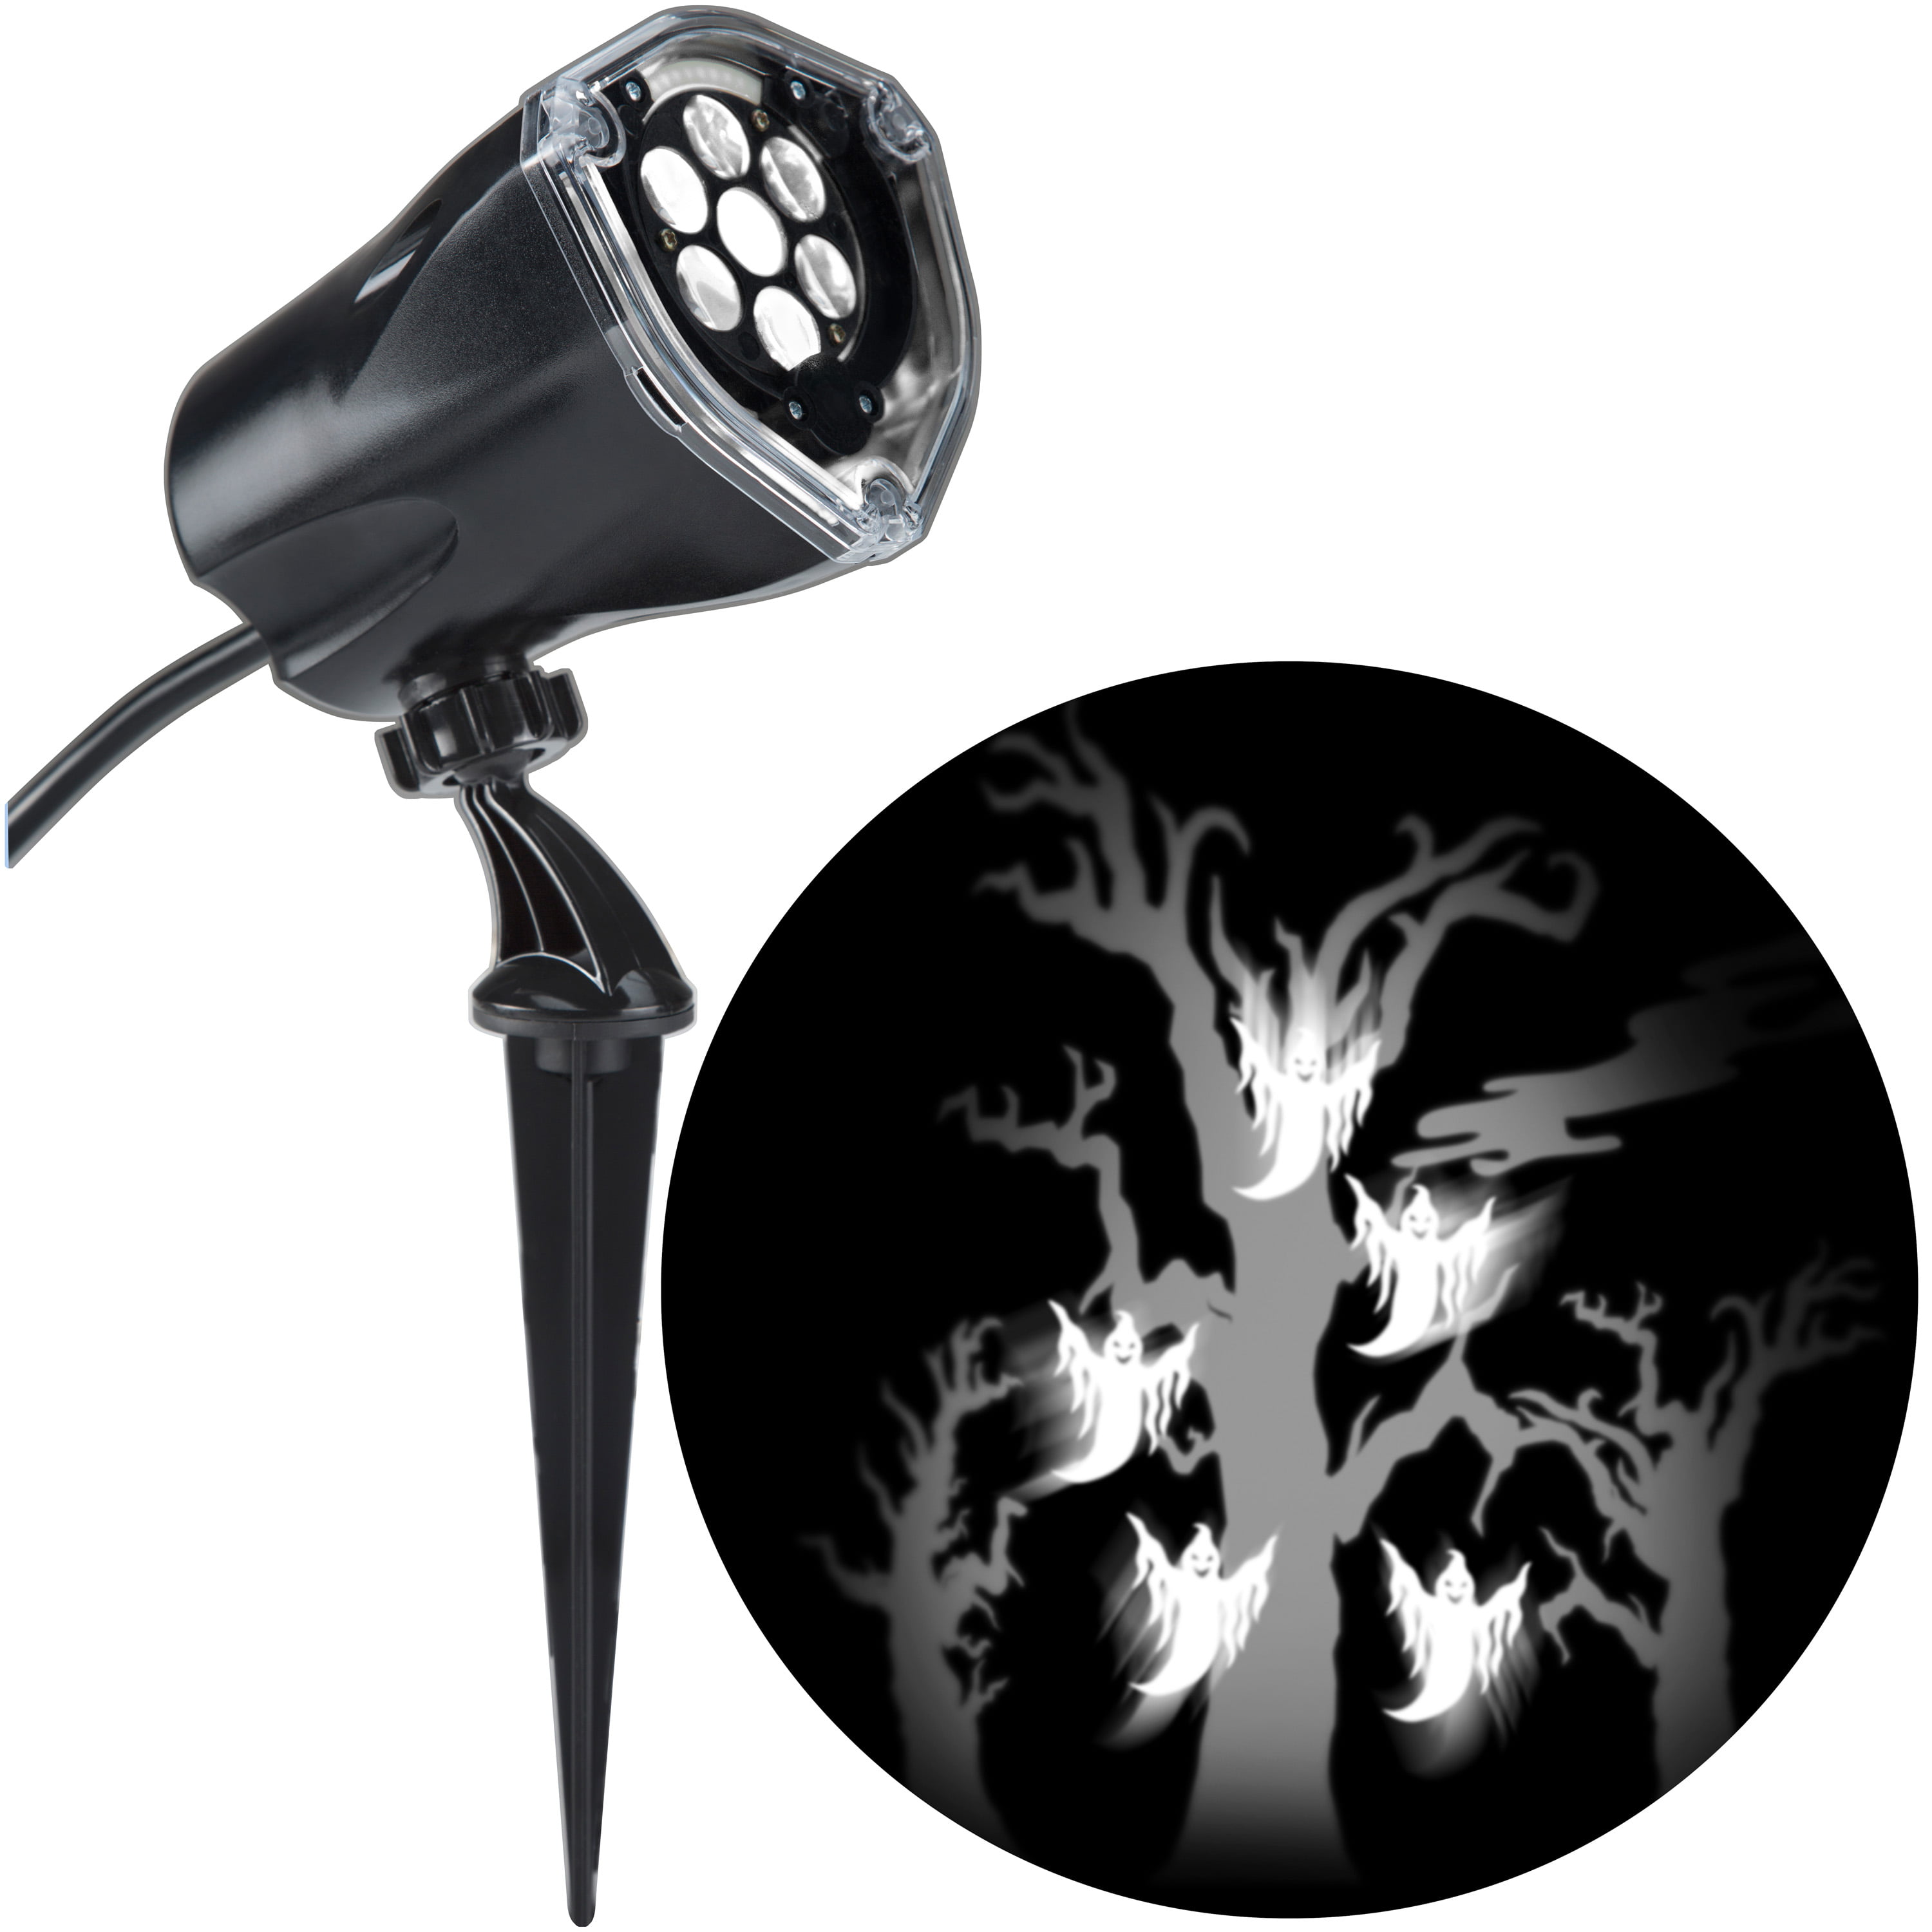 *NEW* Halloween LED Light Show Projection Whirl-A-Motion Ghost Projector Ghosts 